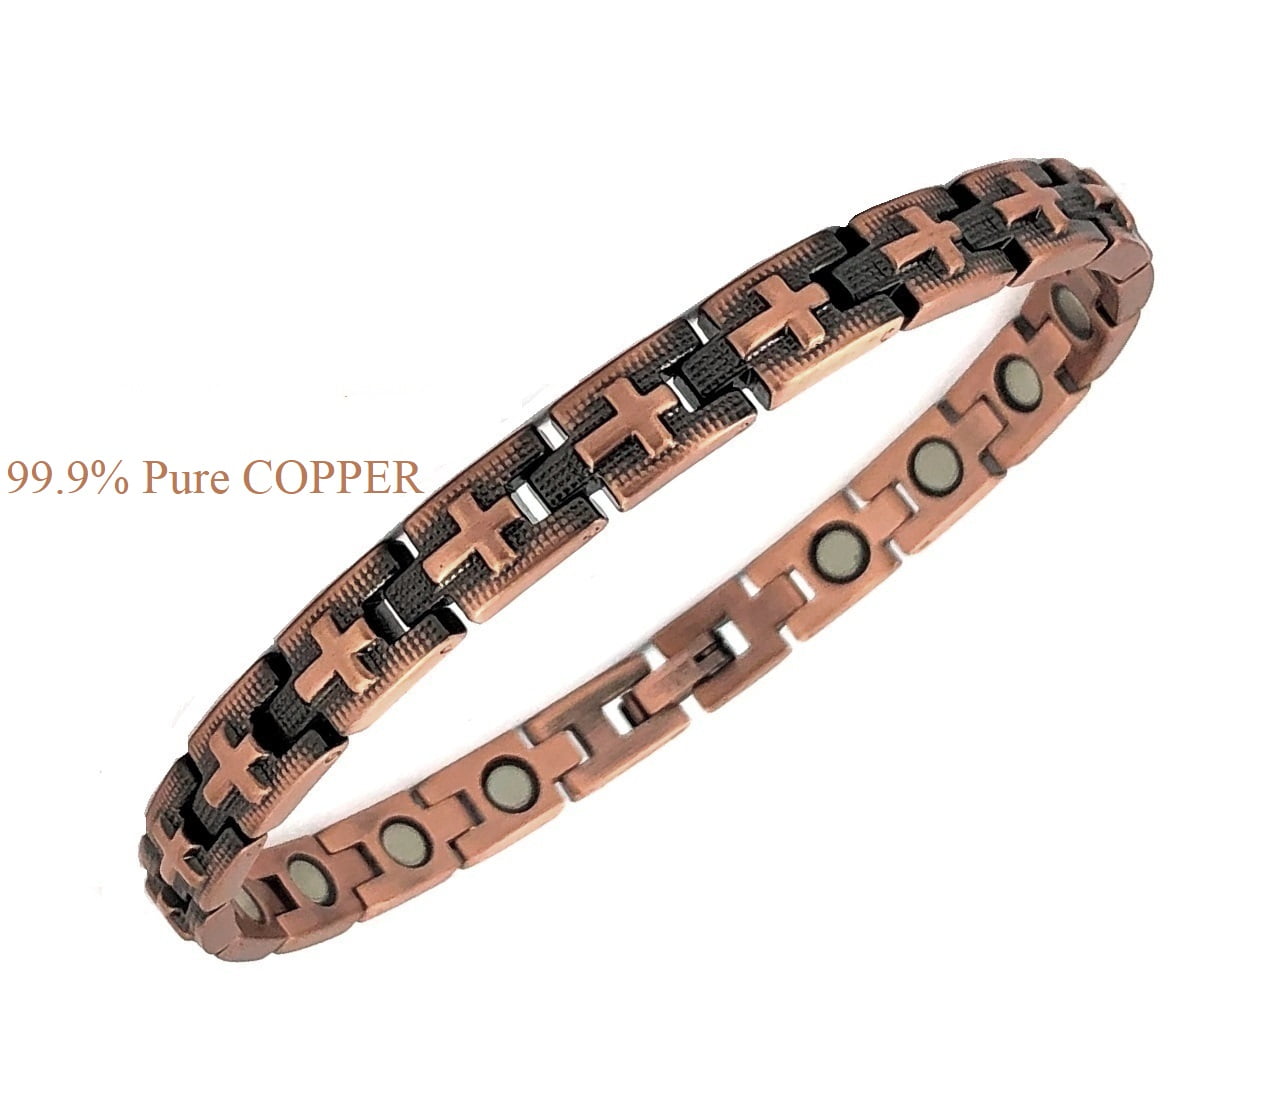 Buy MagnetRX Pure Copper Magnetic Therapy Bracelet | Arthritis Pain Relief  & Carpal Tunnel Relief Ultra Strength Copper Magnetic Bracelets for Men  (Leo Style) Online at Low Prices in India - Amazon.in